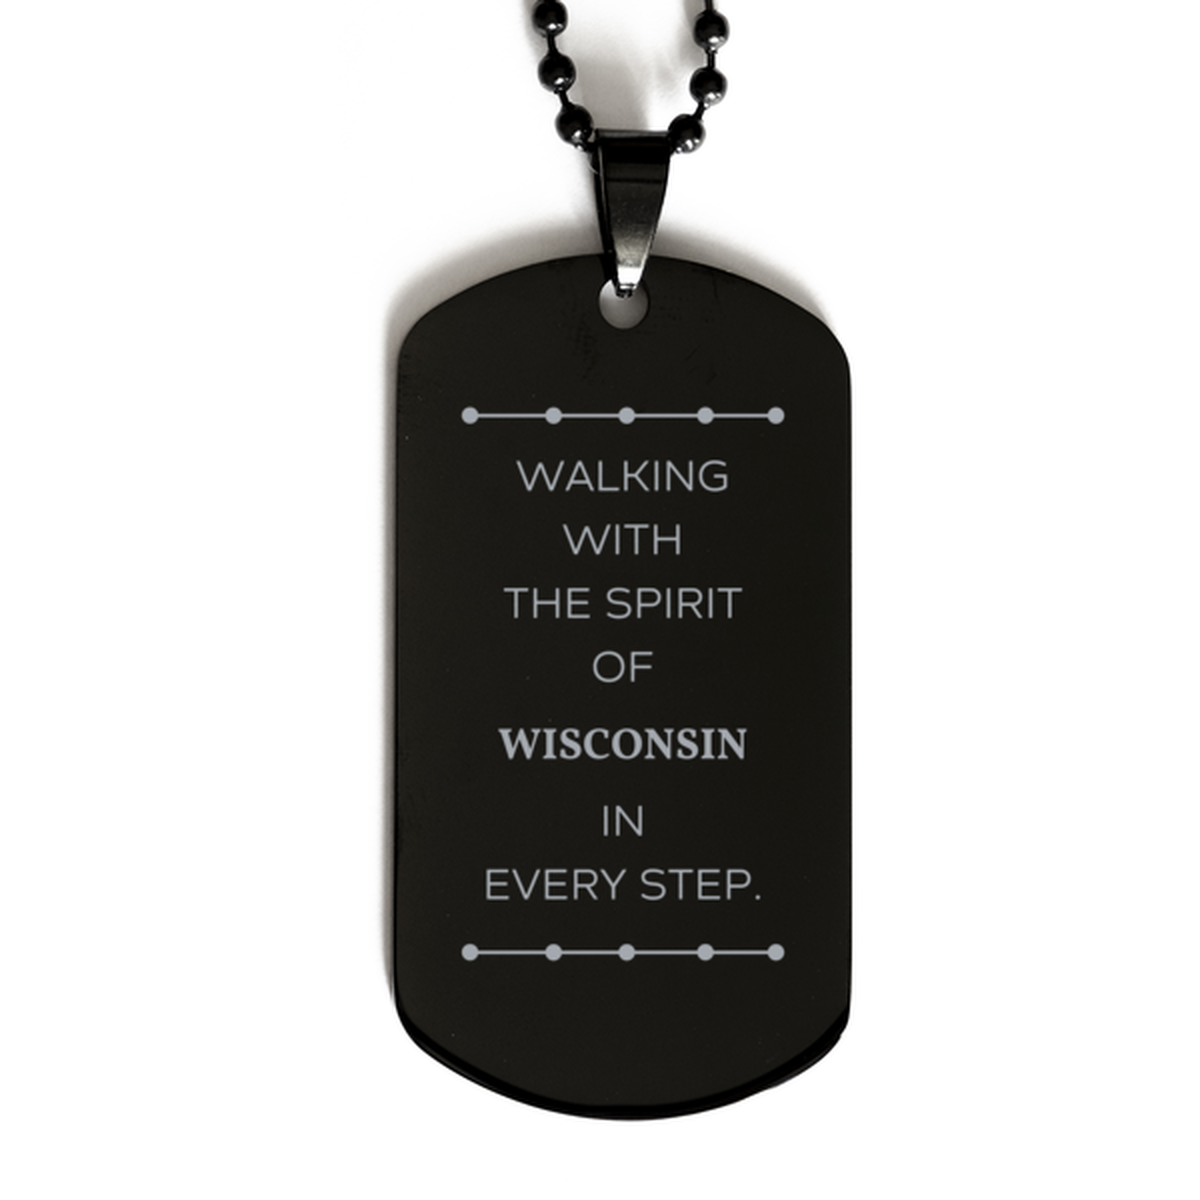 Wisconsin Gifts, Walking with the spirit, Love Wisconsin Birthday Christmas Black Dog Tag For Wisconsin People, Men, Women, Friends